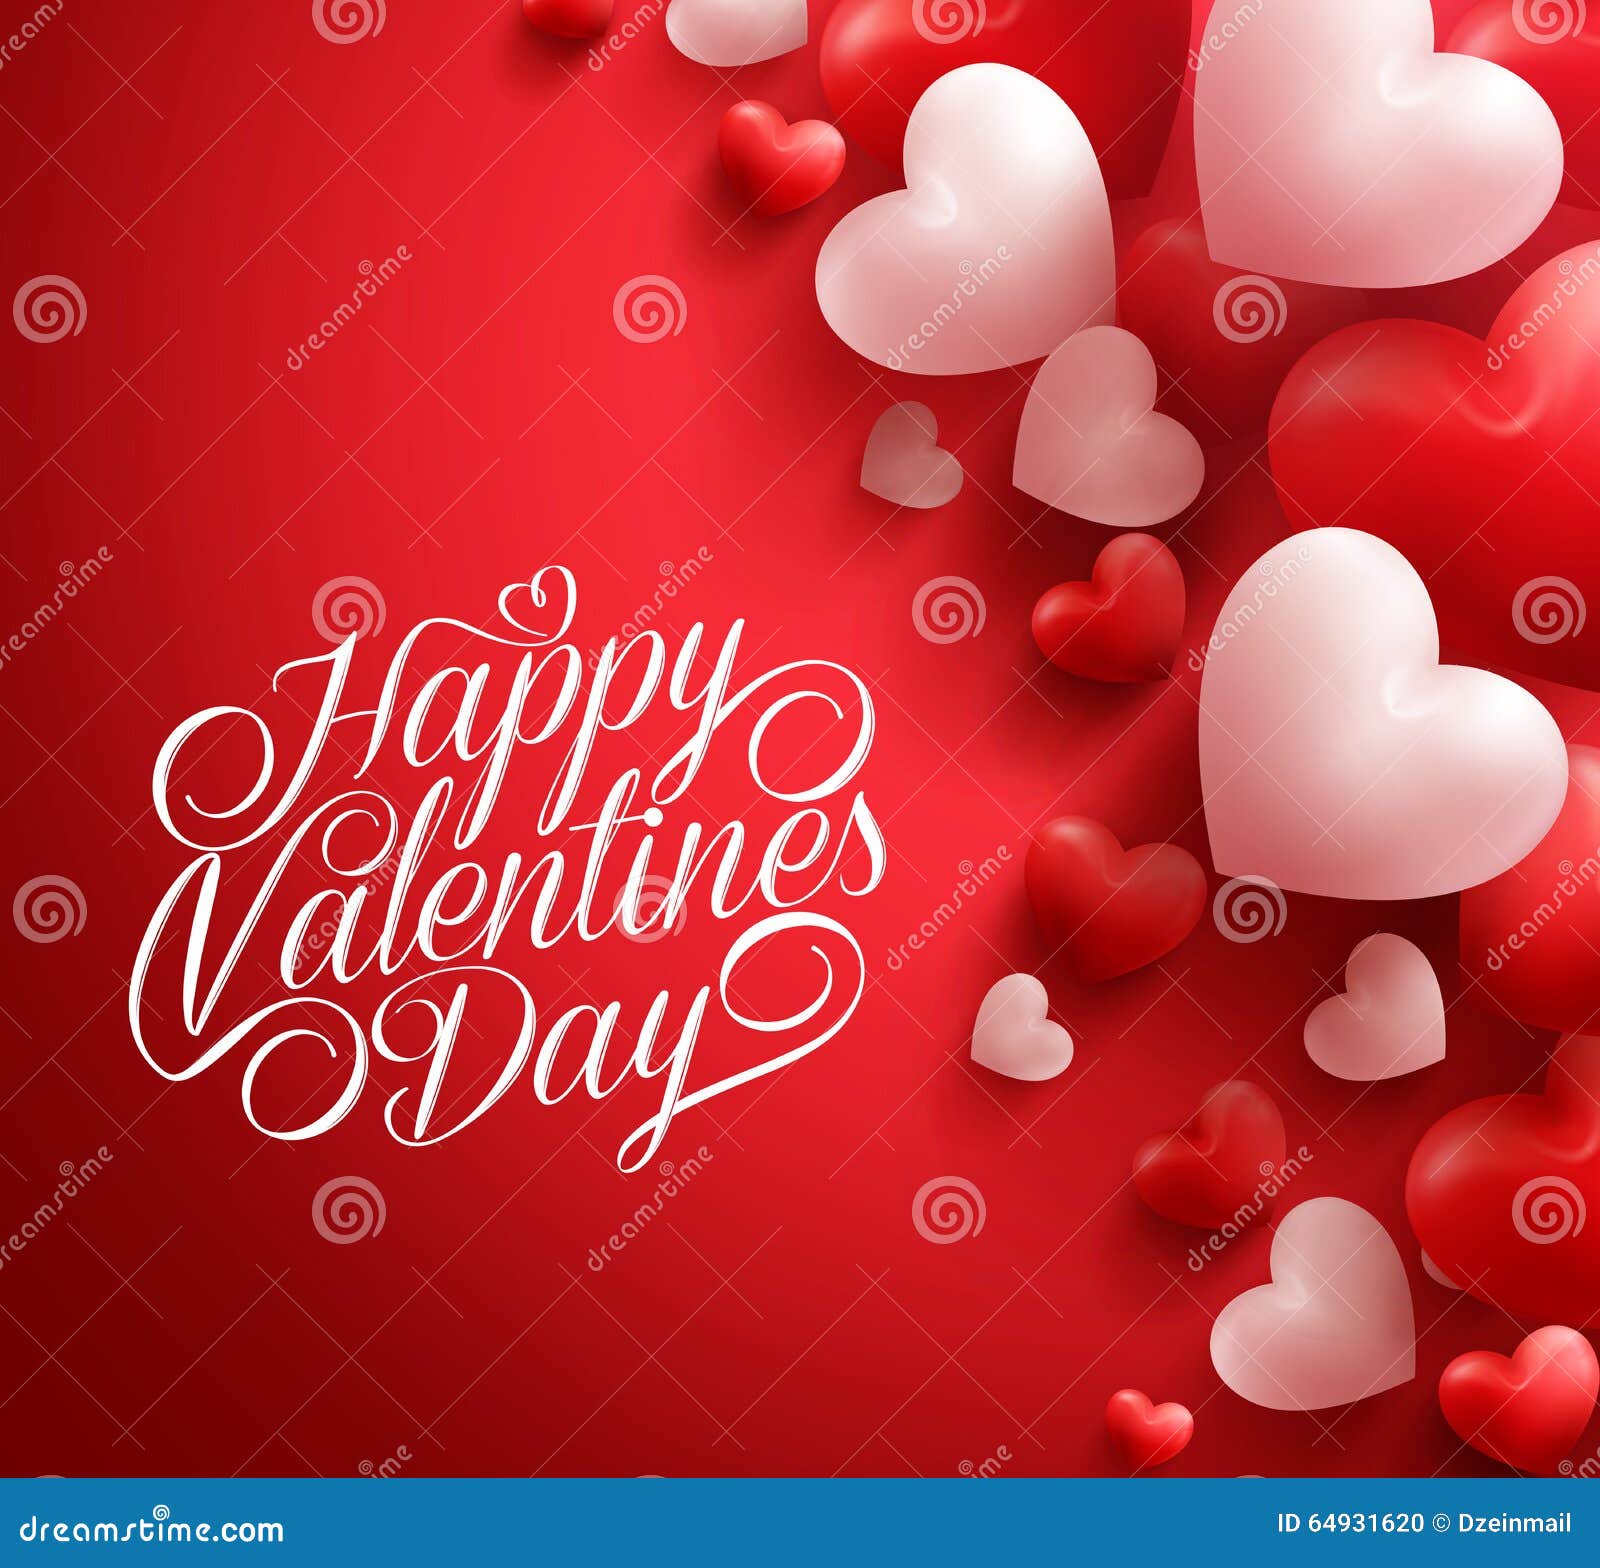 valentine hearts in red background floating with happy valentines day greetings